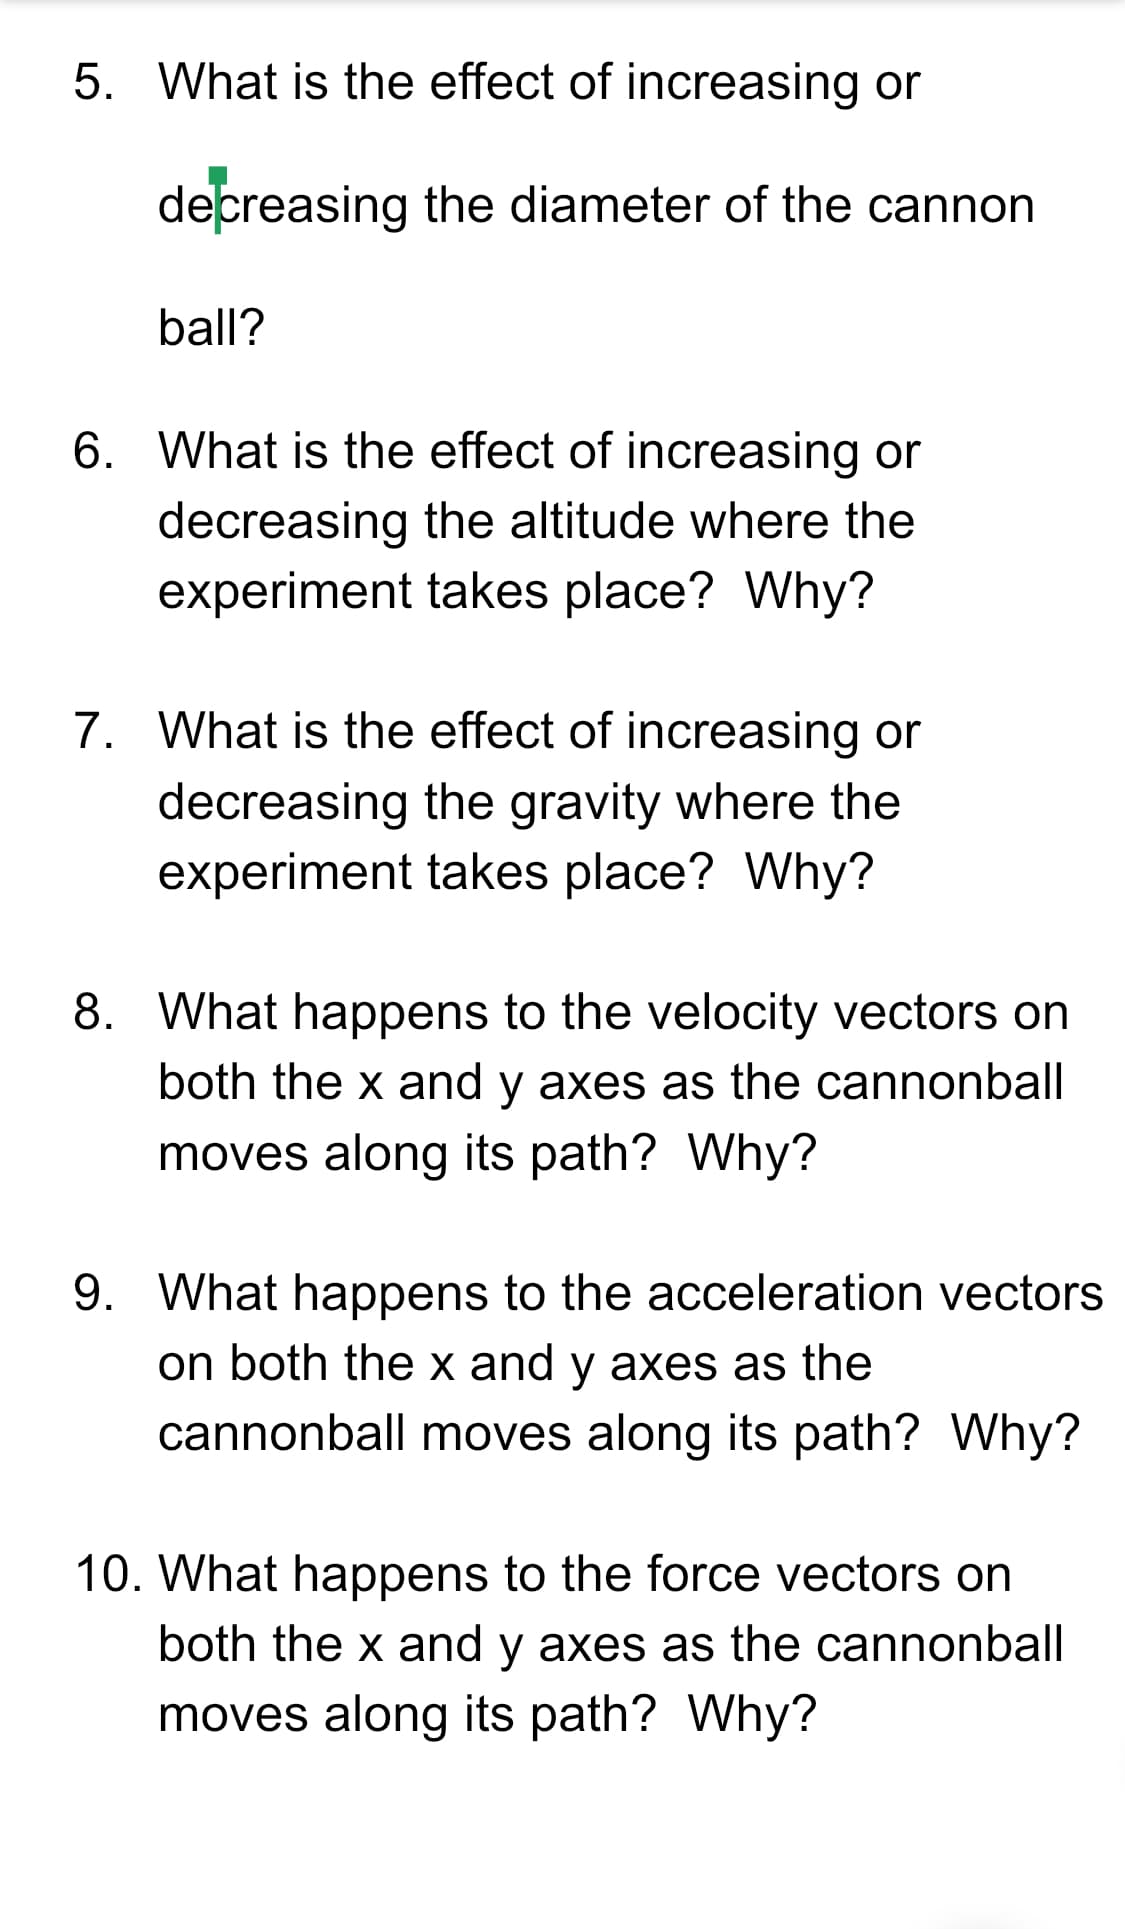 5. What is the effect of increasing or
decreasing the diameter of the cannon
ball?
6. What is the effect of increasing or
decreasing the altitude where the
experiment takes place? Why?
7. What is the effect of increasing or
decreasing the gravity where the
experiment takes place? Why?
8. What happens to the velocity vectors on
both the x and y axes as the cannonball
moves along its path? Why?
9. What happens to the acceleration vectors
on both the x and y axes as the
cannonball moves along its path? Why?
10. What happens to the force vectors on
both the x and y axes as the cannonball
moves along its path? Why?
